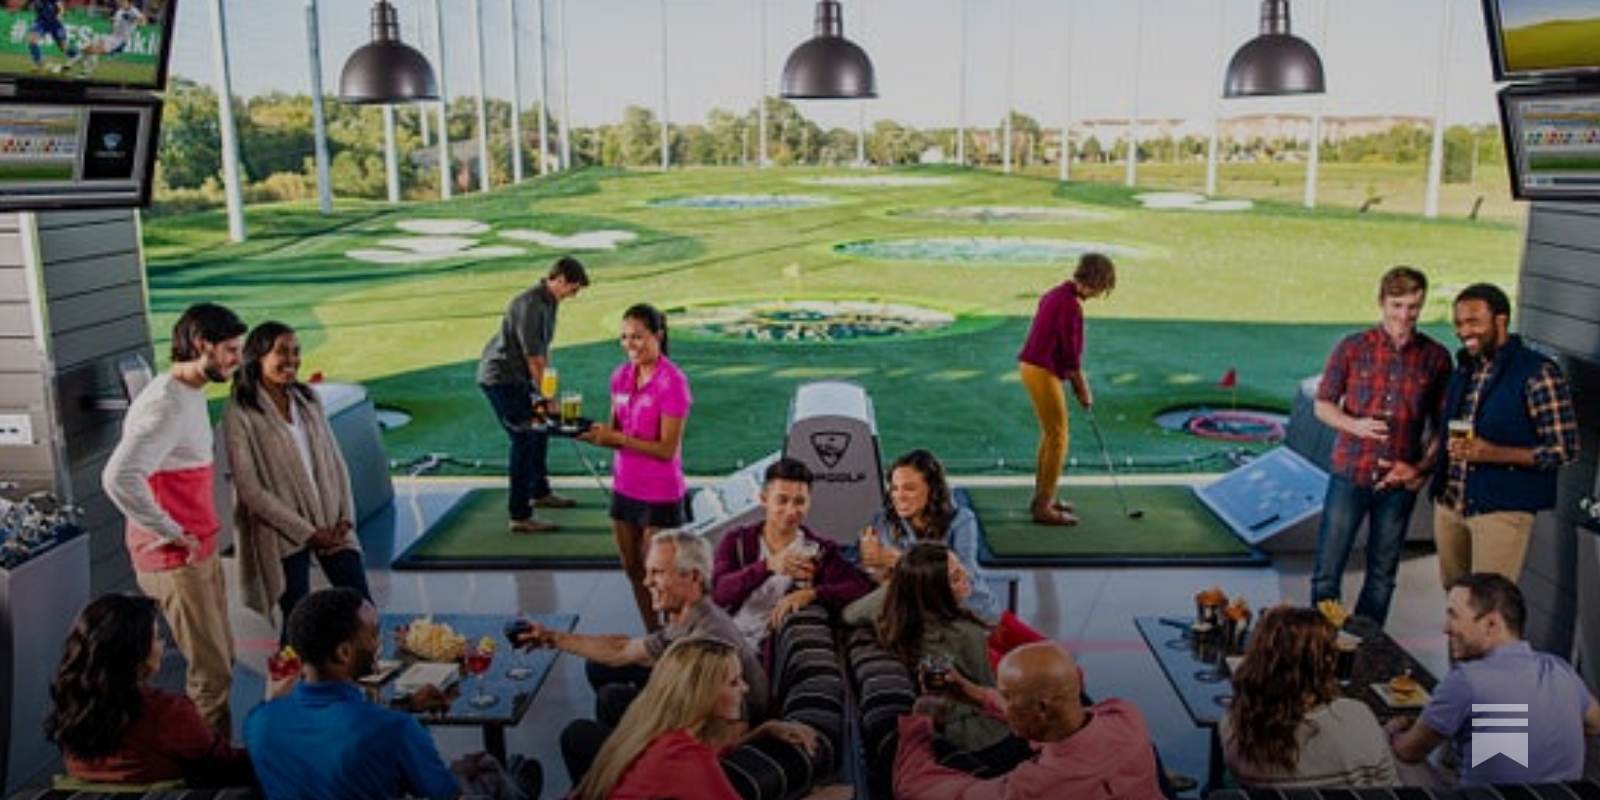 Topgolf is merging with Callaway in a deal valued at $2 billion